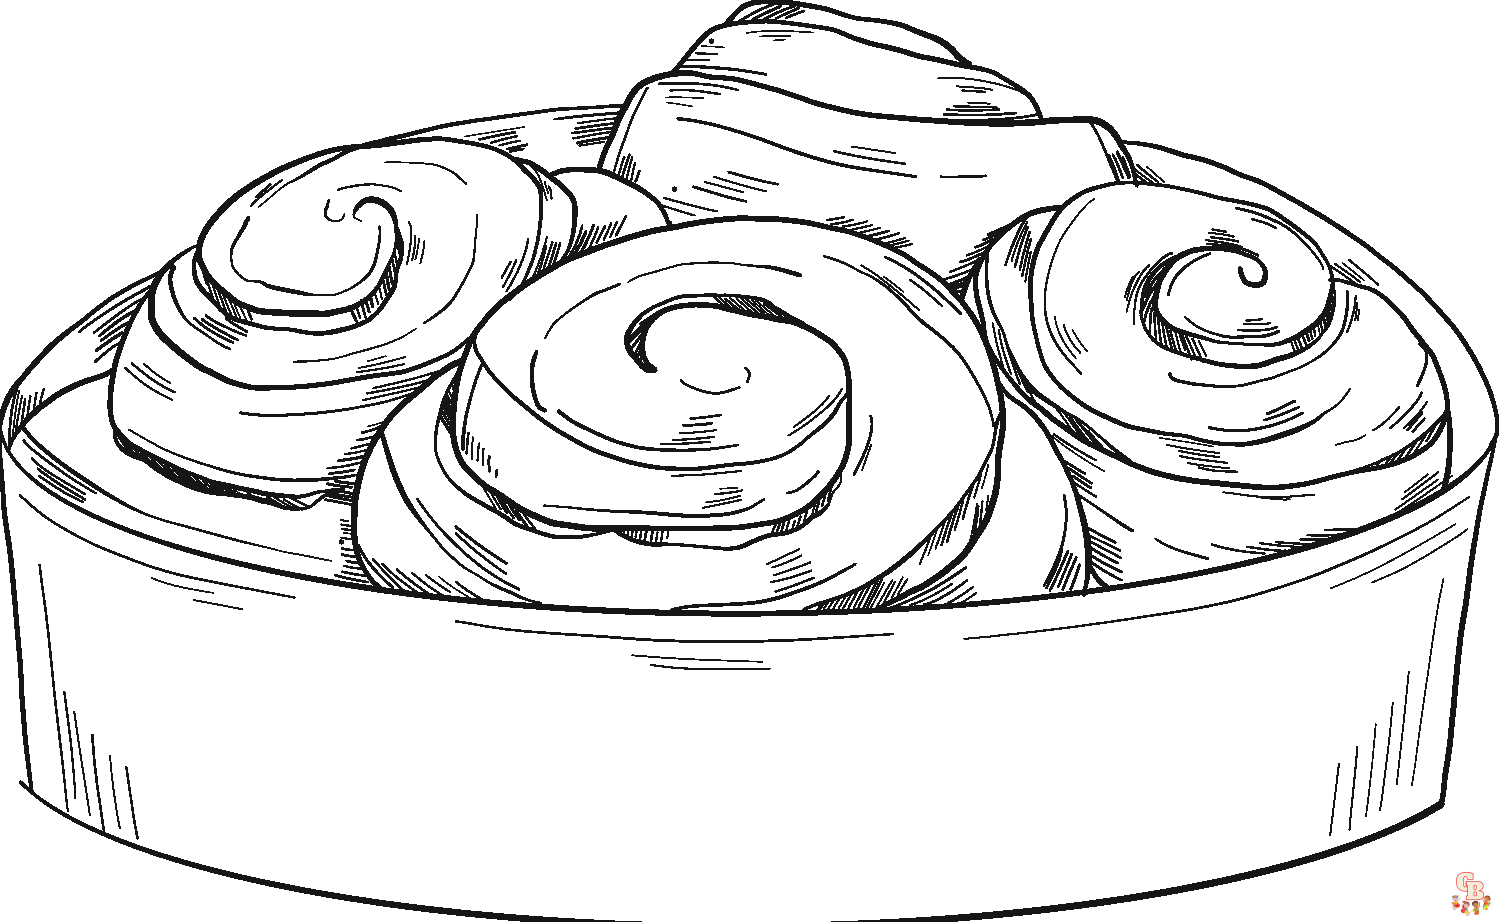 Roll Drawings Coloring Children  Coloring Page Rolls Children